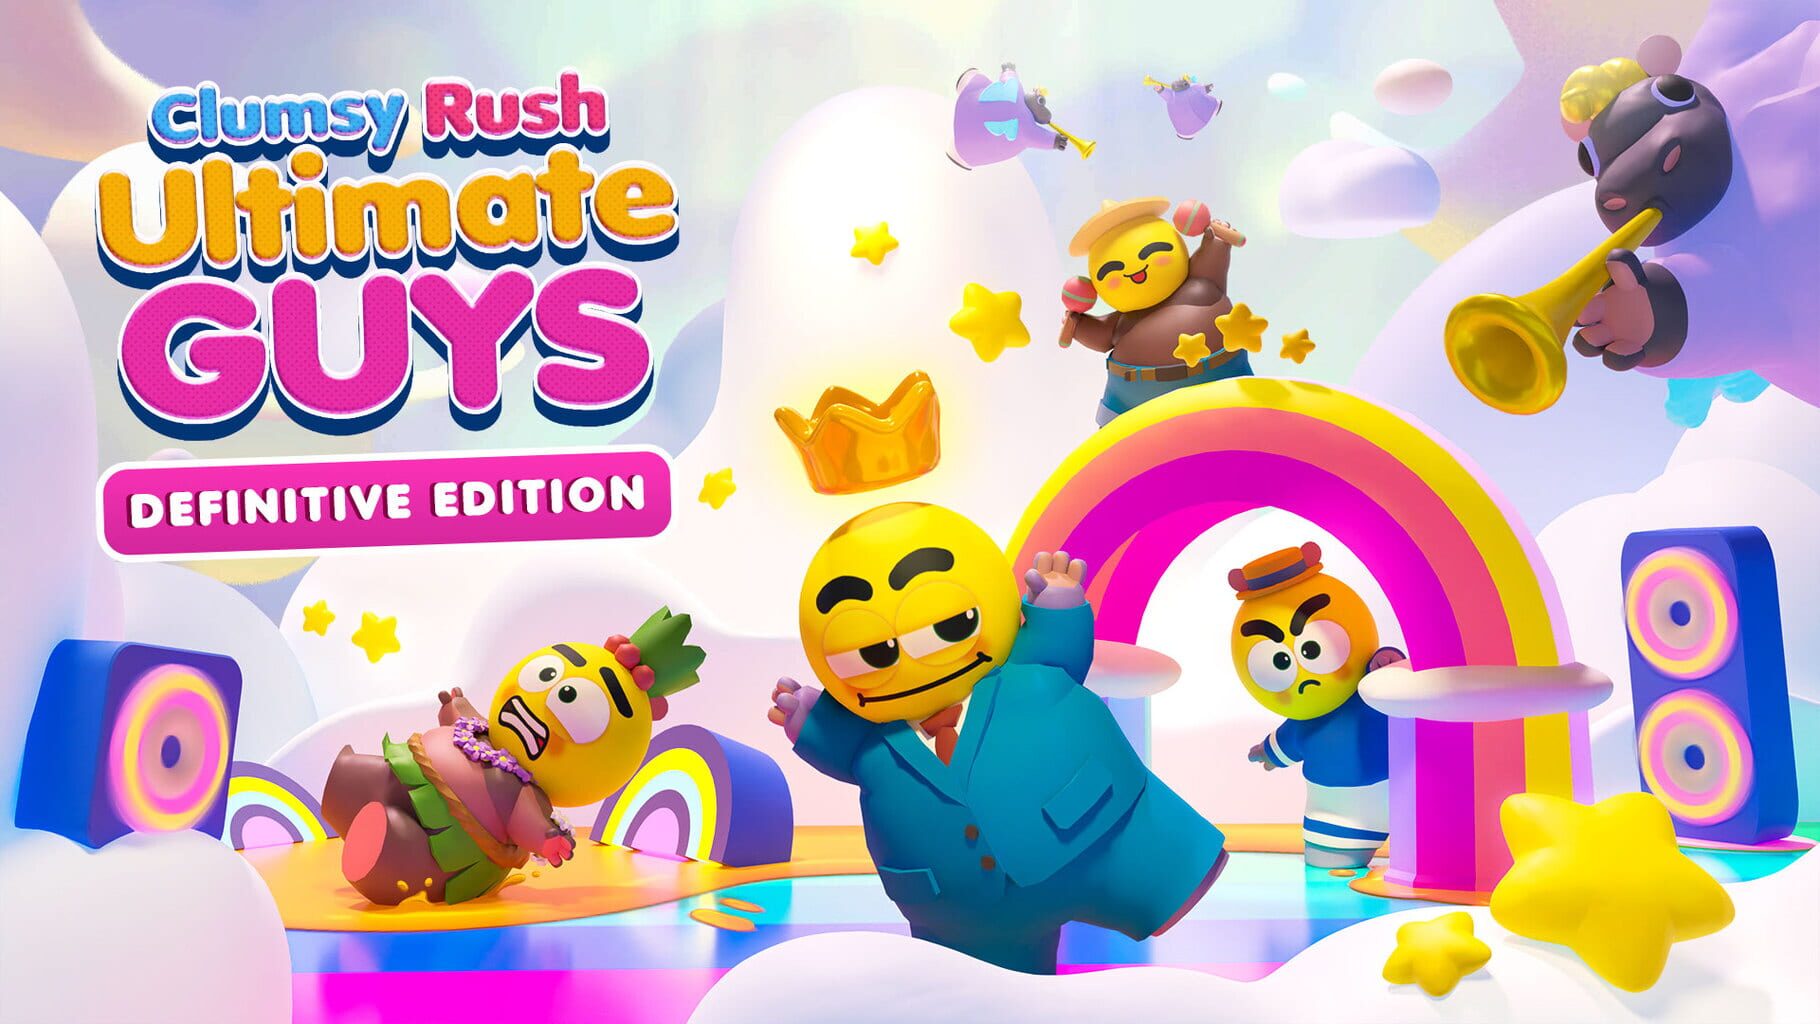 Clumsy Rush: Ultimate Guys - Definitive Edition artwork